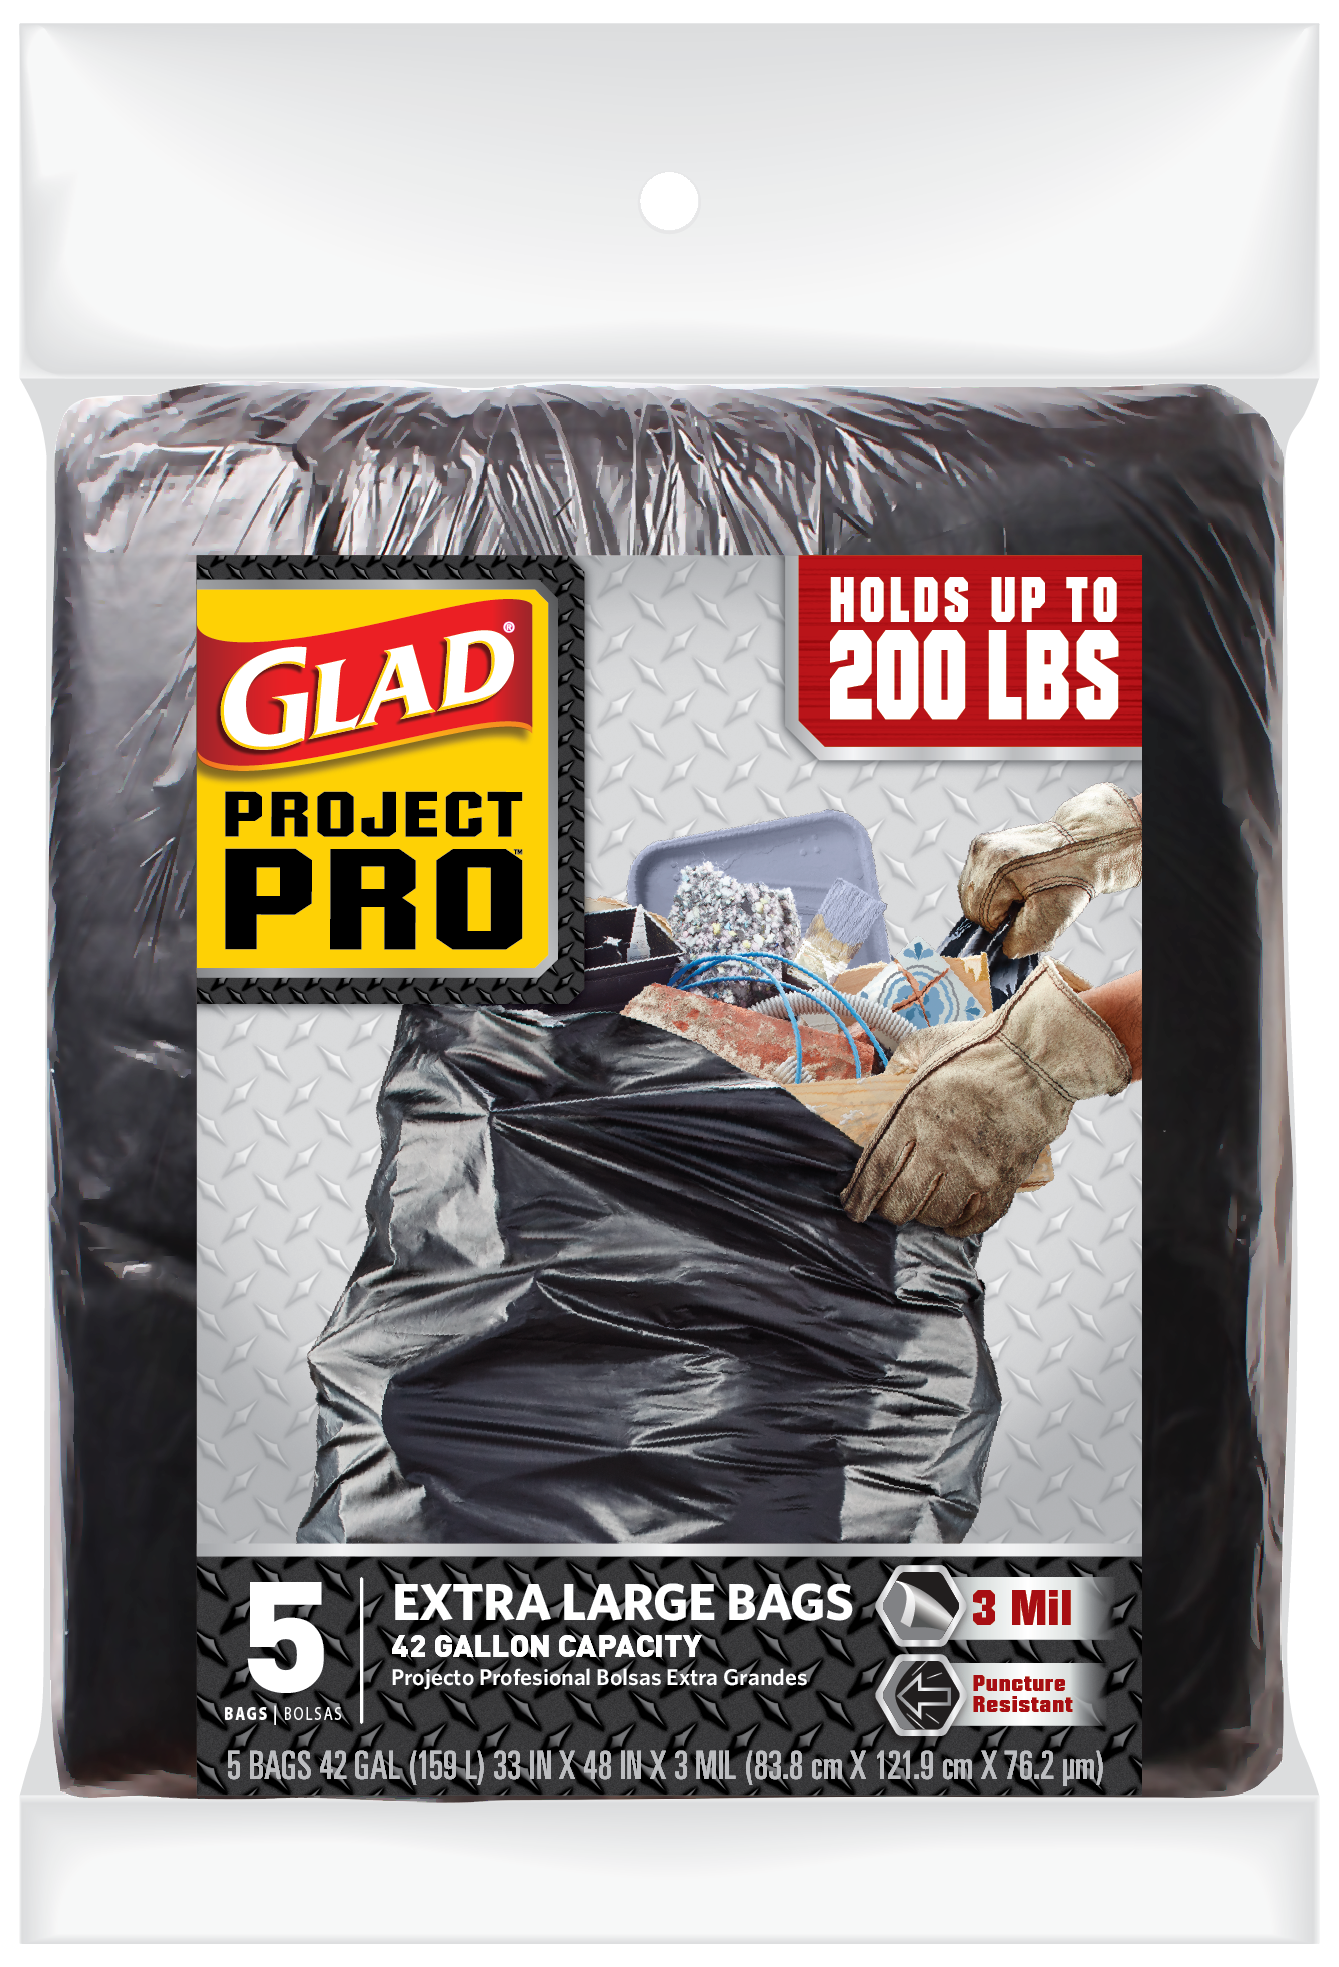 Haultail Woven Contractor Trash Bags 42gal 20 Count per Pack White